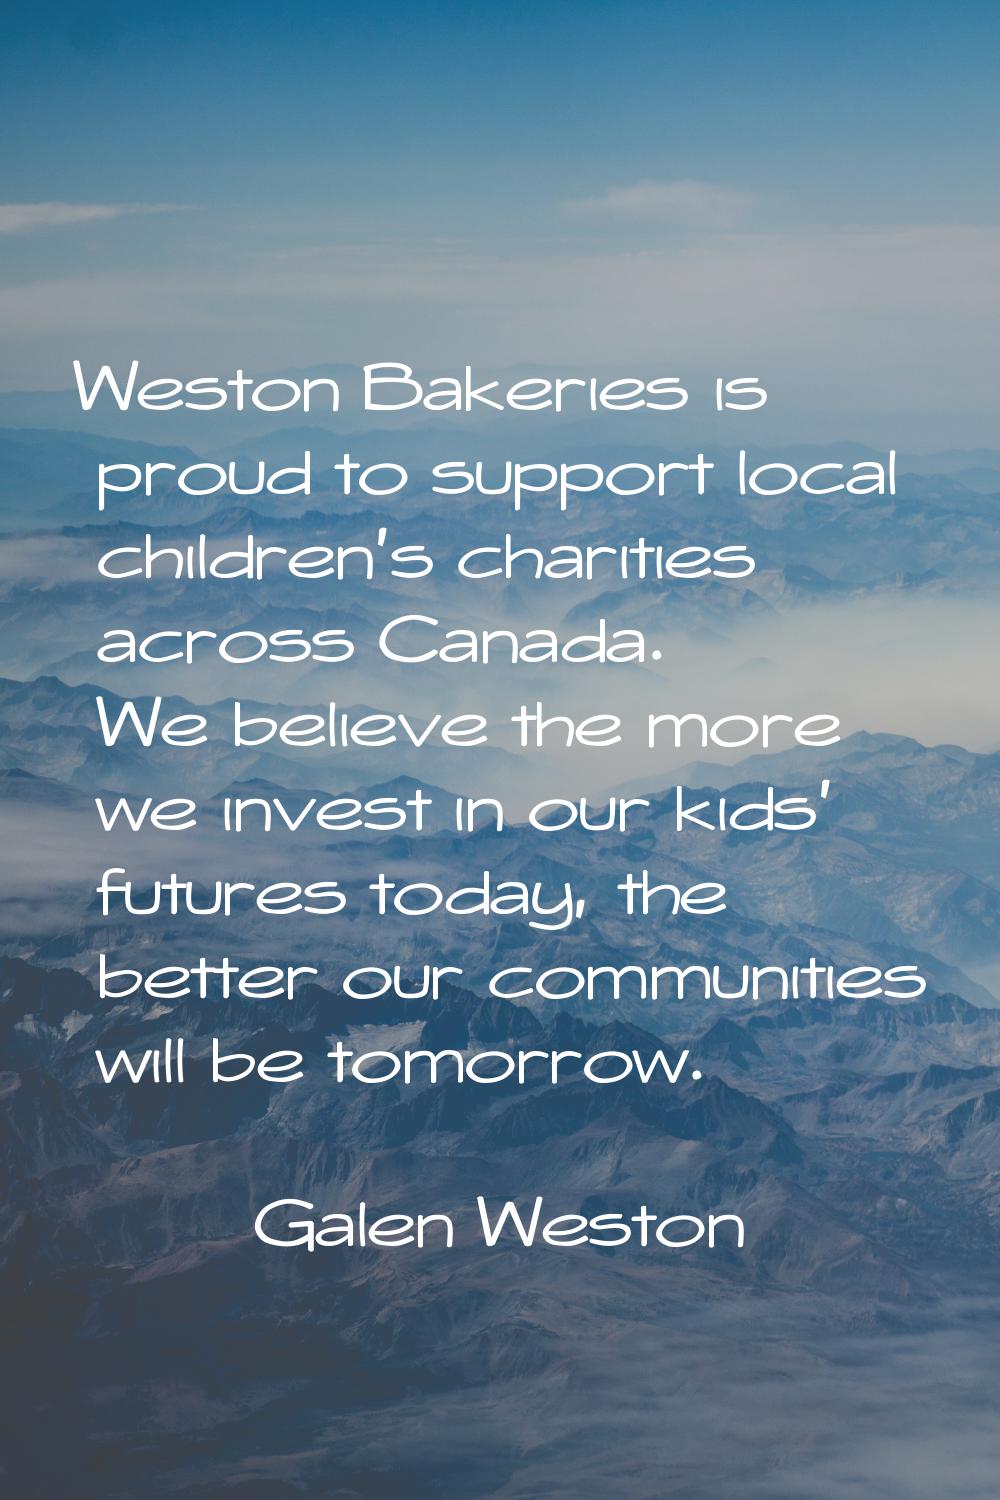 Weston Bakeries is proud to support local children's charities across Canada. We believe the more w